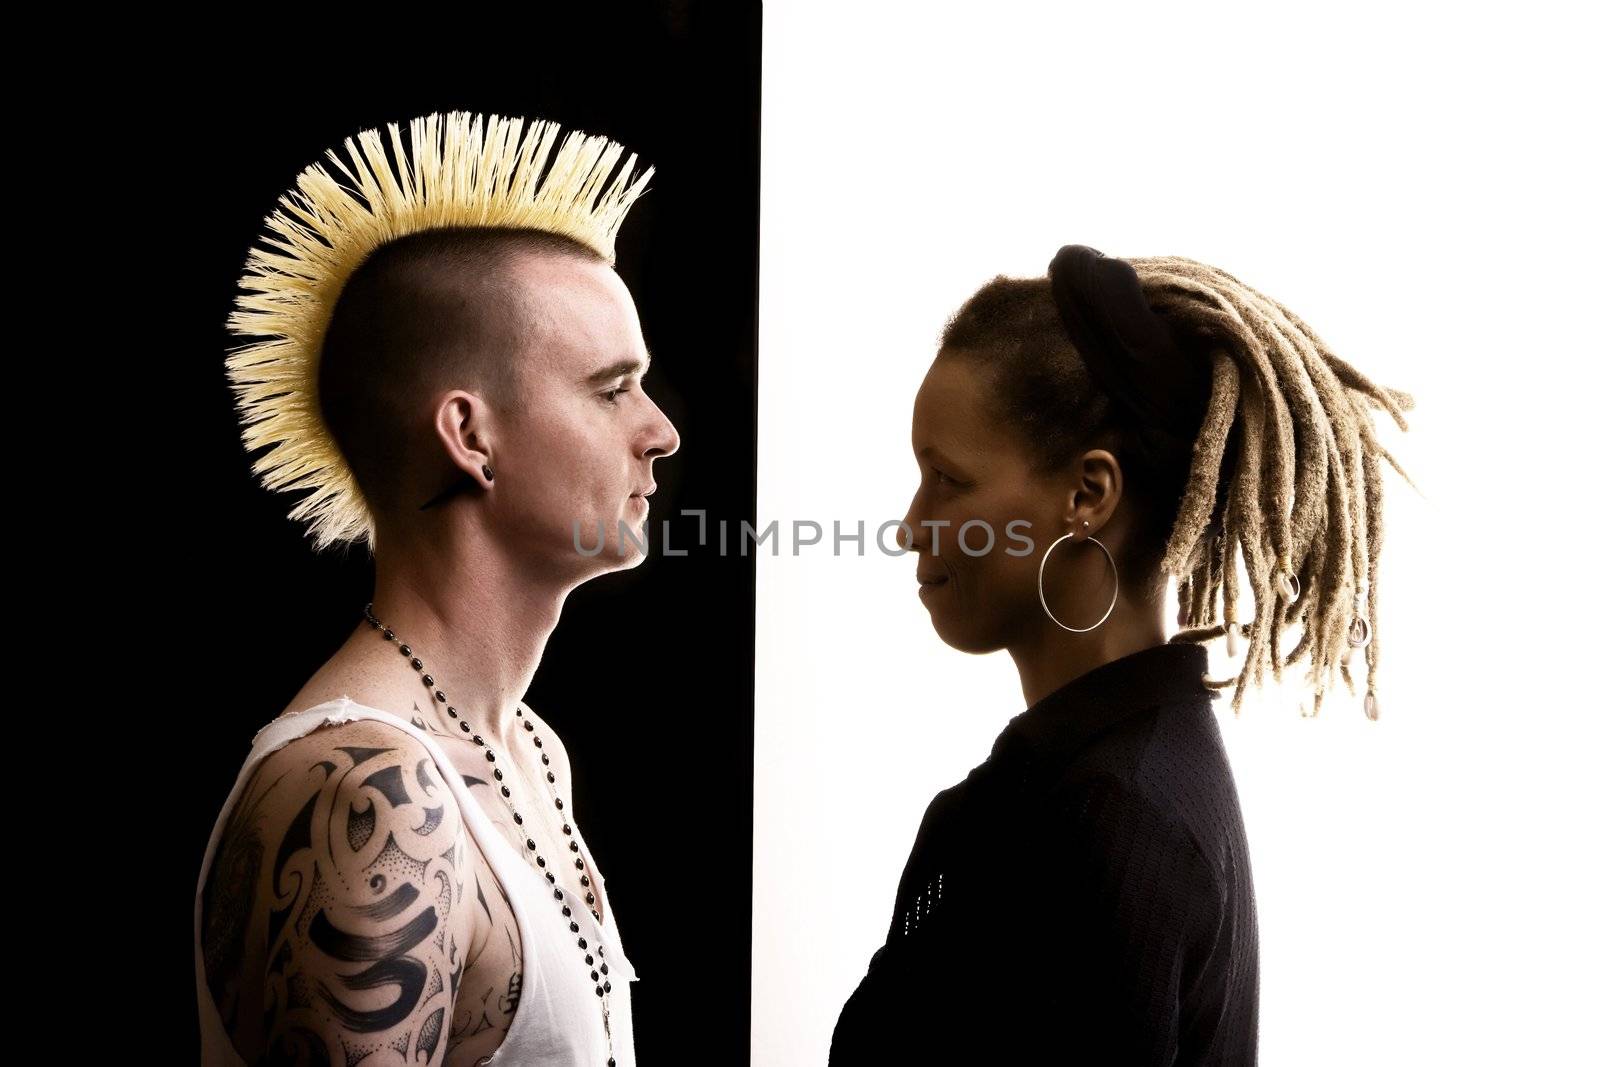 Man with Mohawk and Woman with Dreadlocks by Creatista